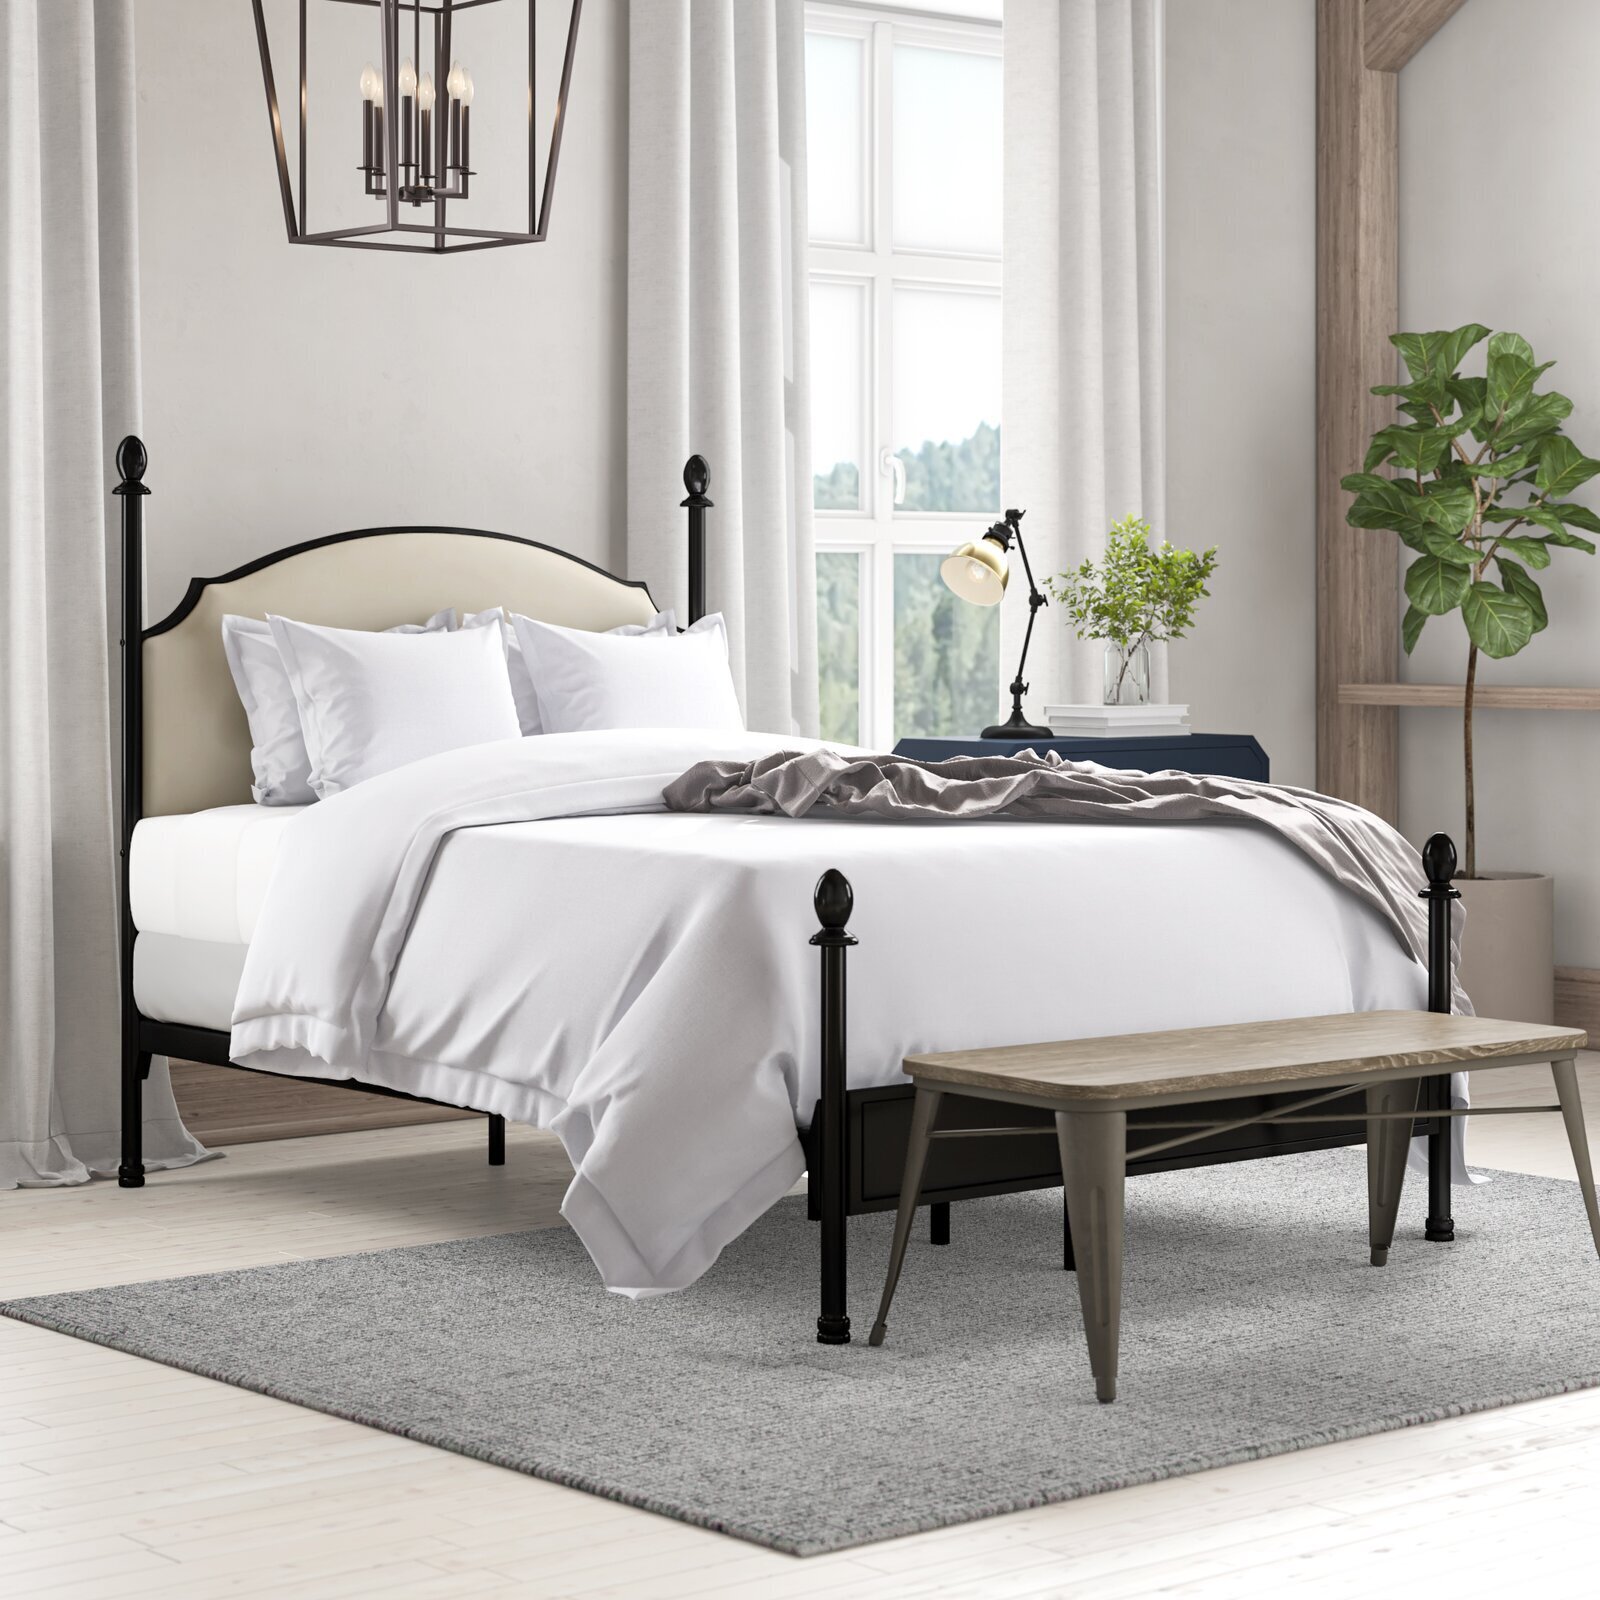 Elegant Low Profile 4 Poster Twin Bed